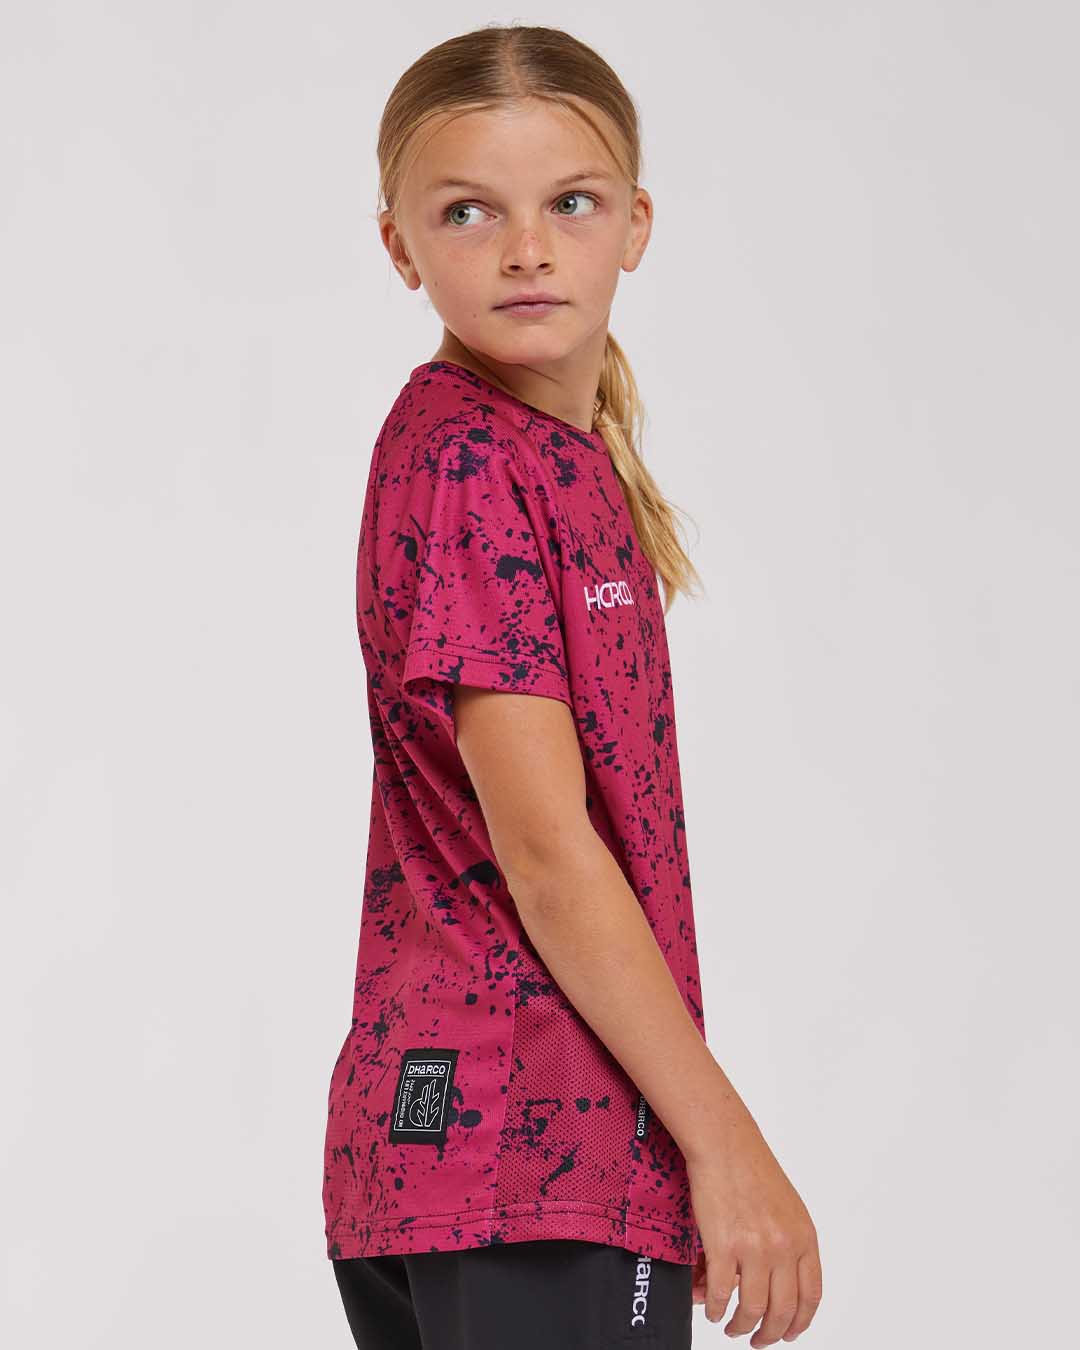 Youth Short Sleeve Jersey | Chili Peppers